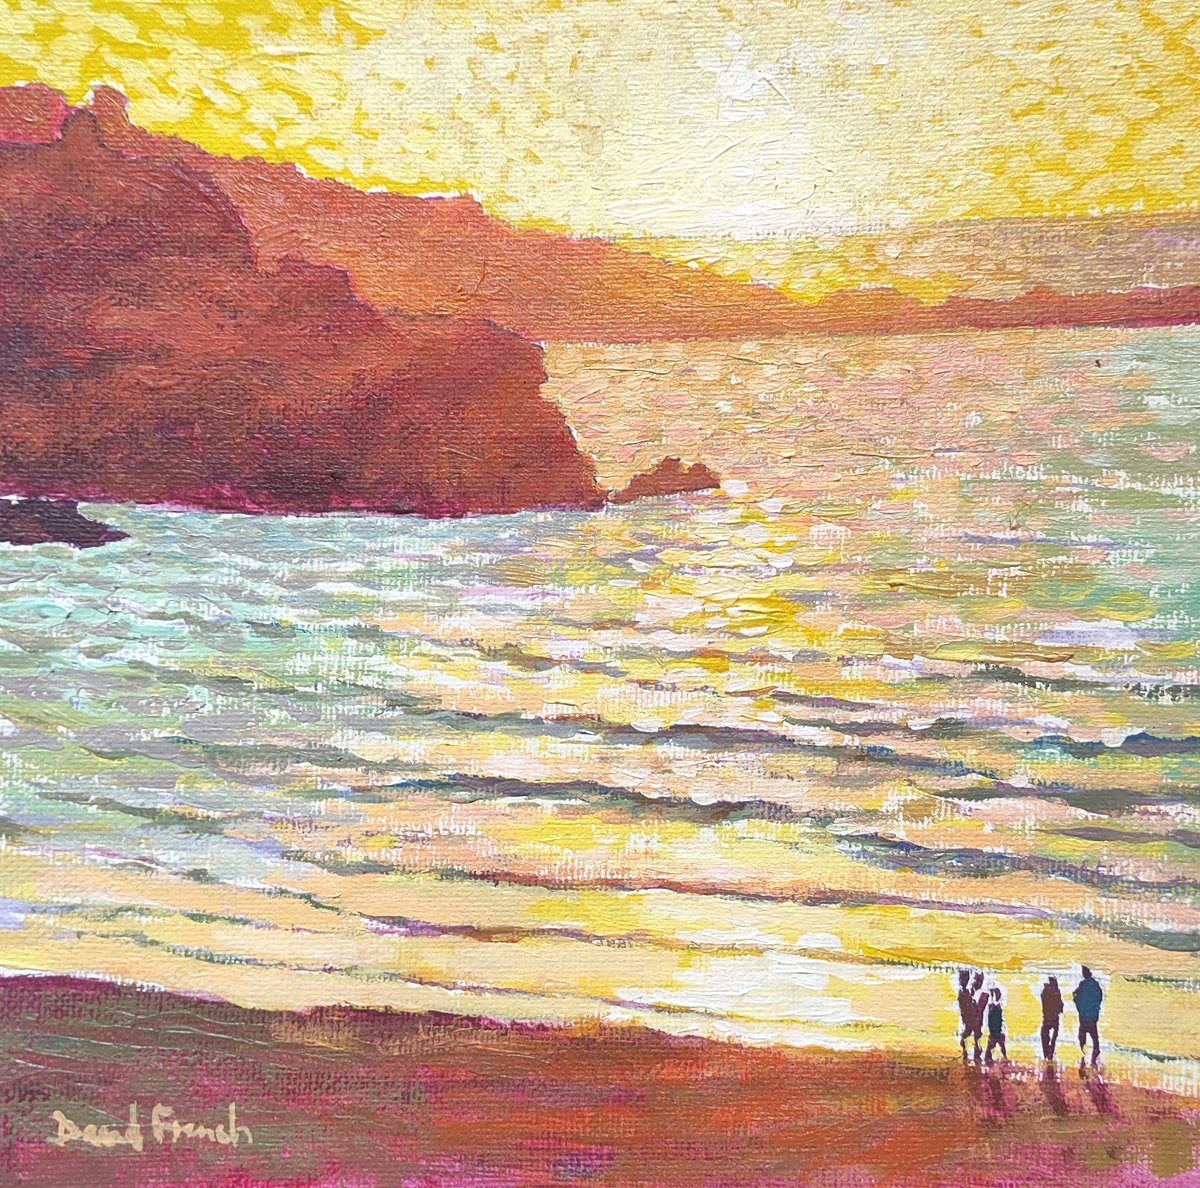 To see the majority of my work, you'll need to travel to St Ives in Cornwall
The sea is usually my focus, but I've been drawn in by the Porthmeor sunsets. This one will be in the Arthouse Gallery soon
20x20cm acrylic on canvas board